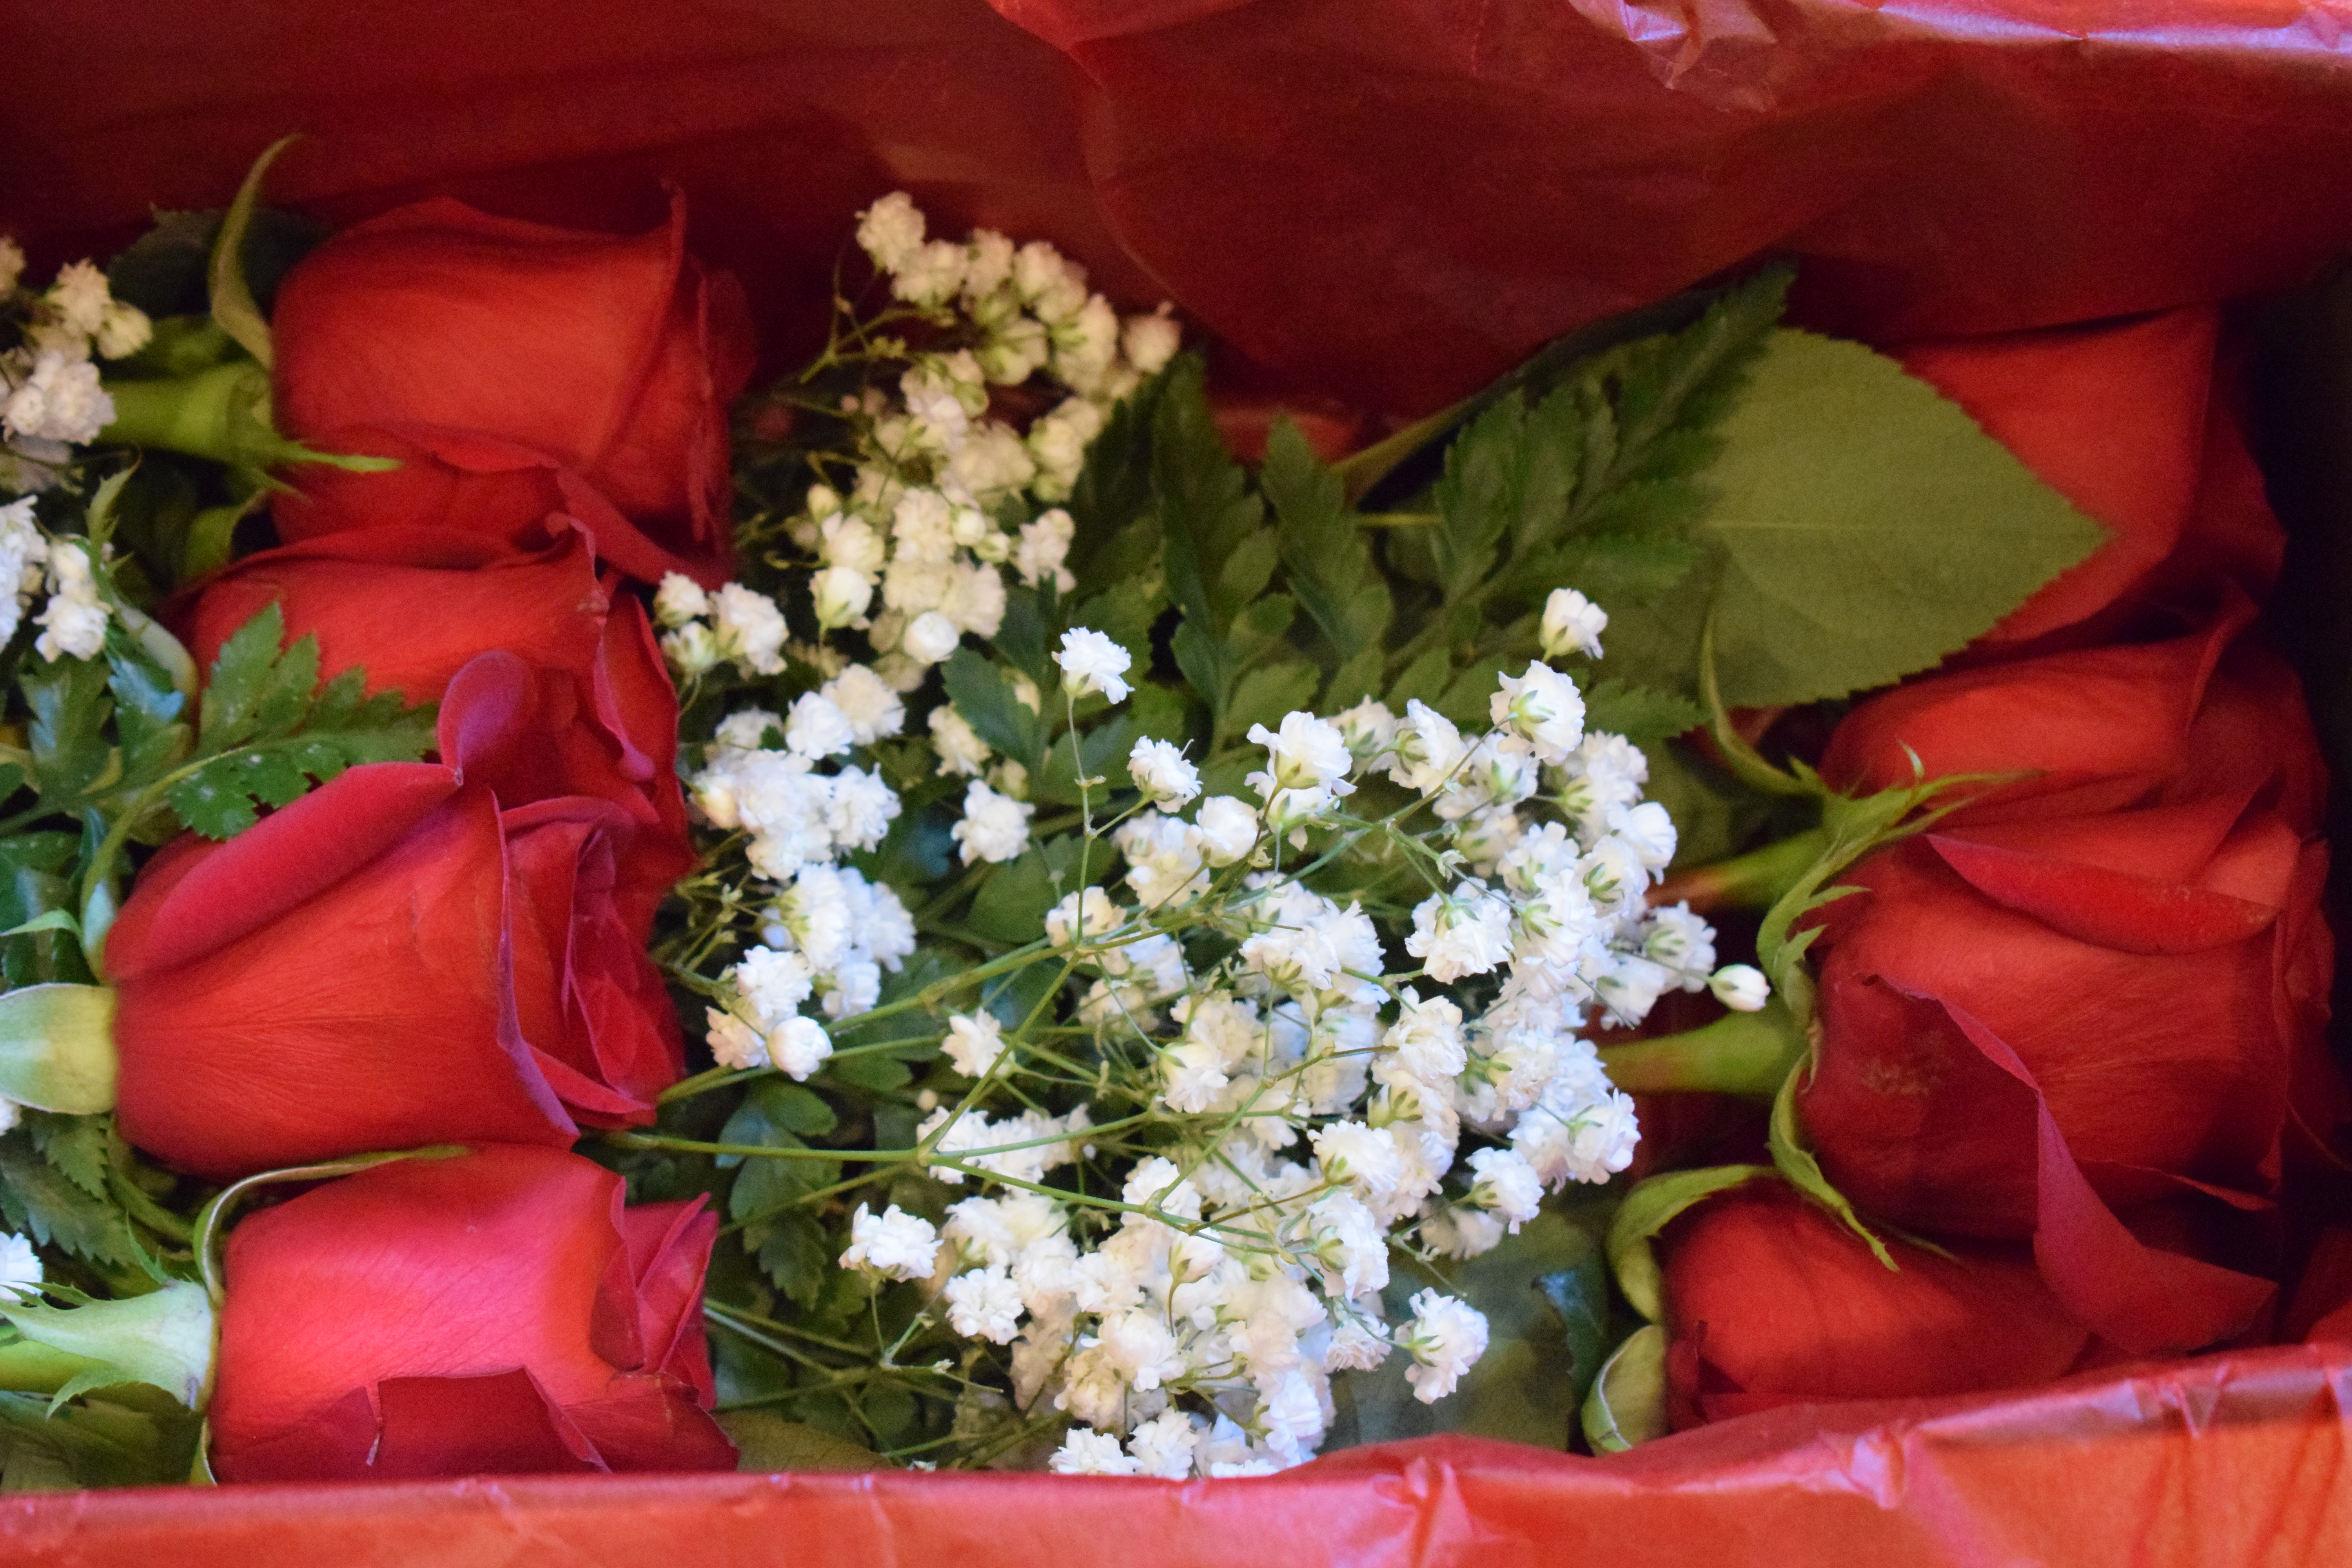 Red Roses in a Delivery Box, Favorite Things Number 10